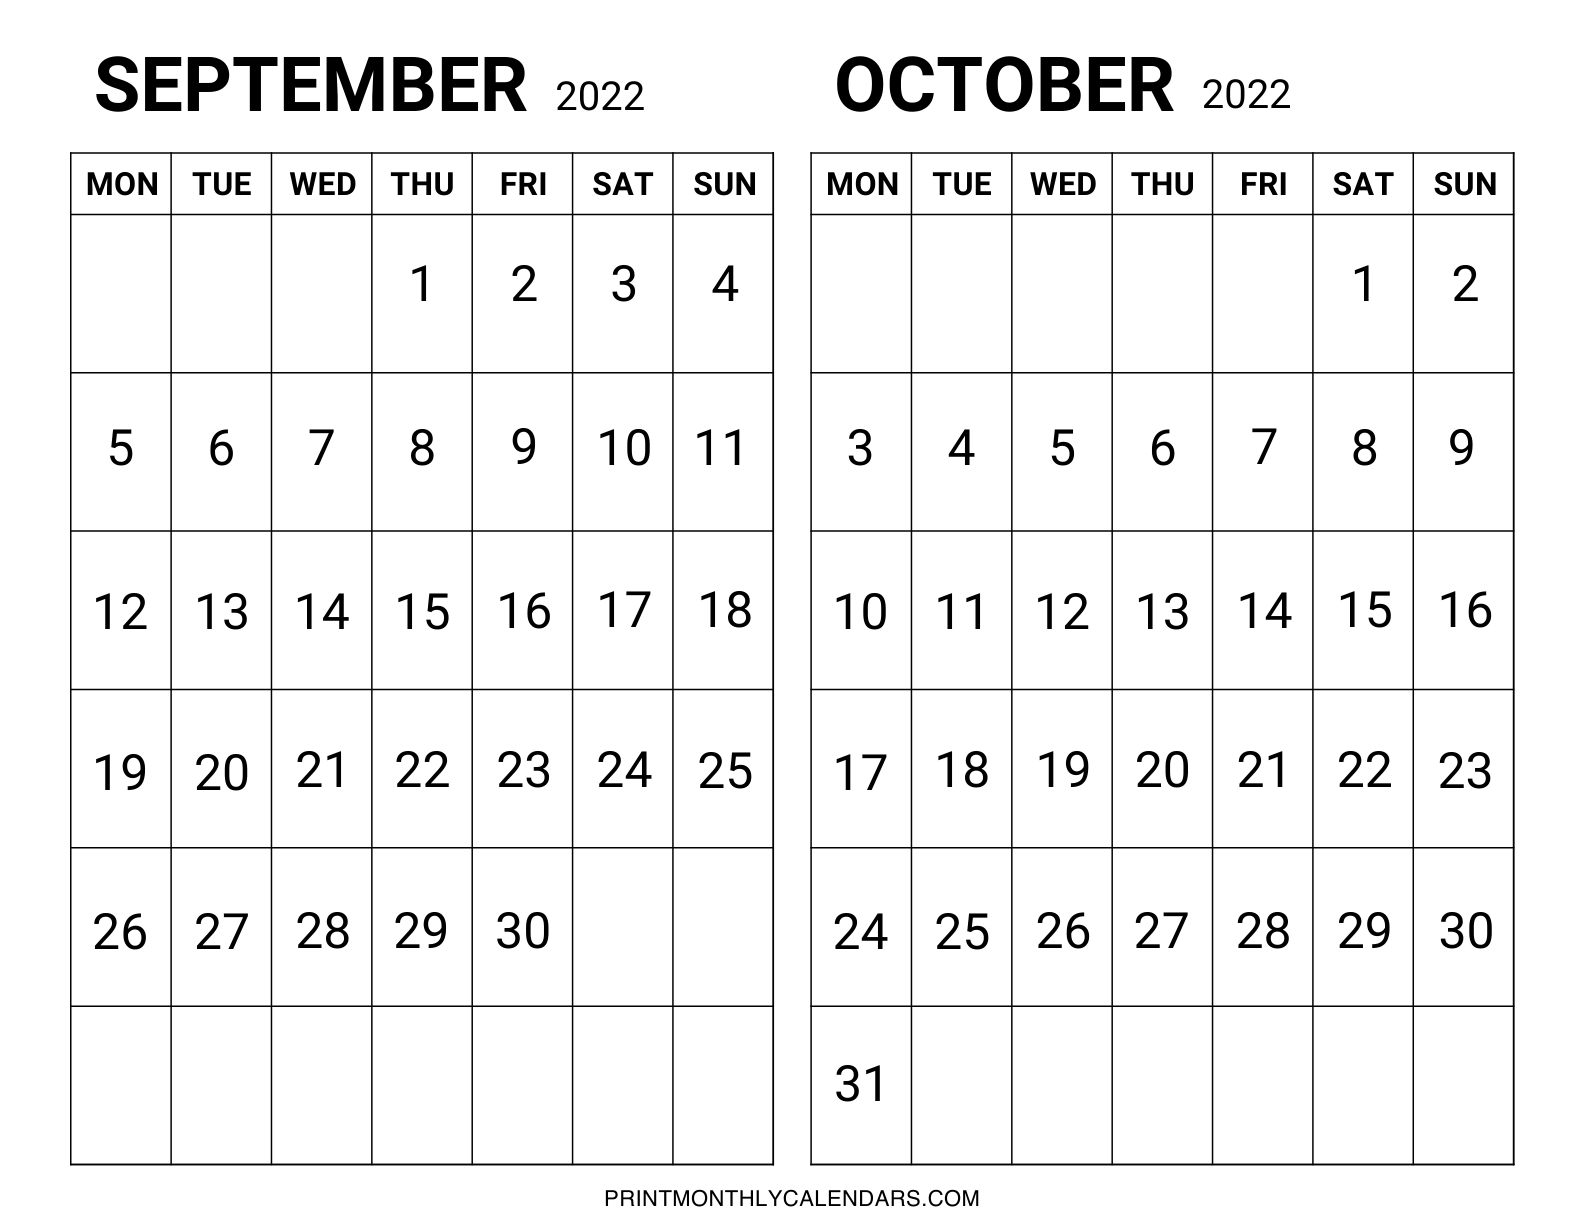 Two-month calendar for September and October 2022, with weekdays starting on Monday rather than Sunday. The calendar grids are laid up in a landscape format with bold monthly dates.